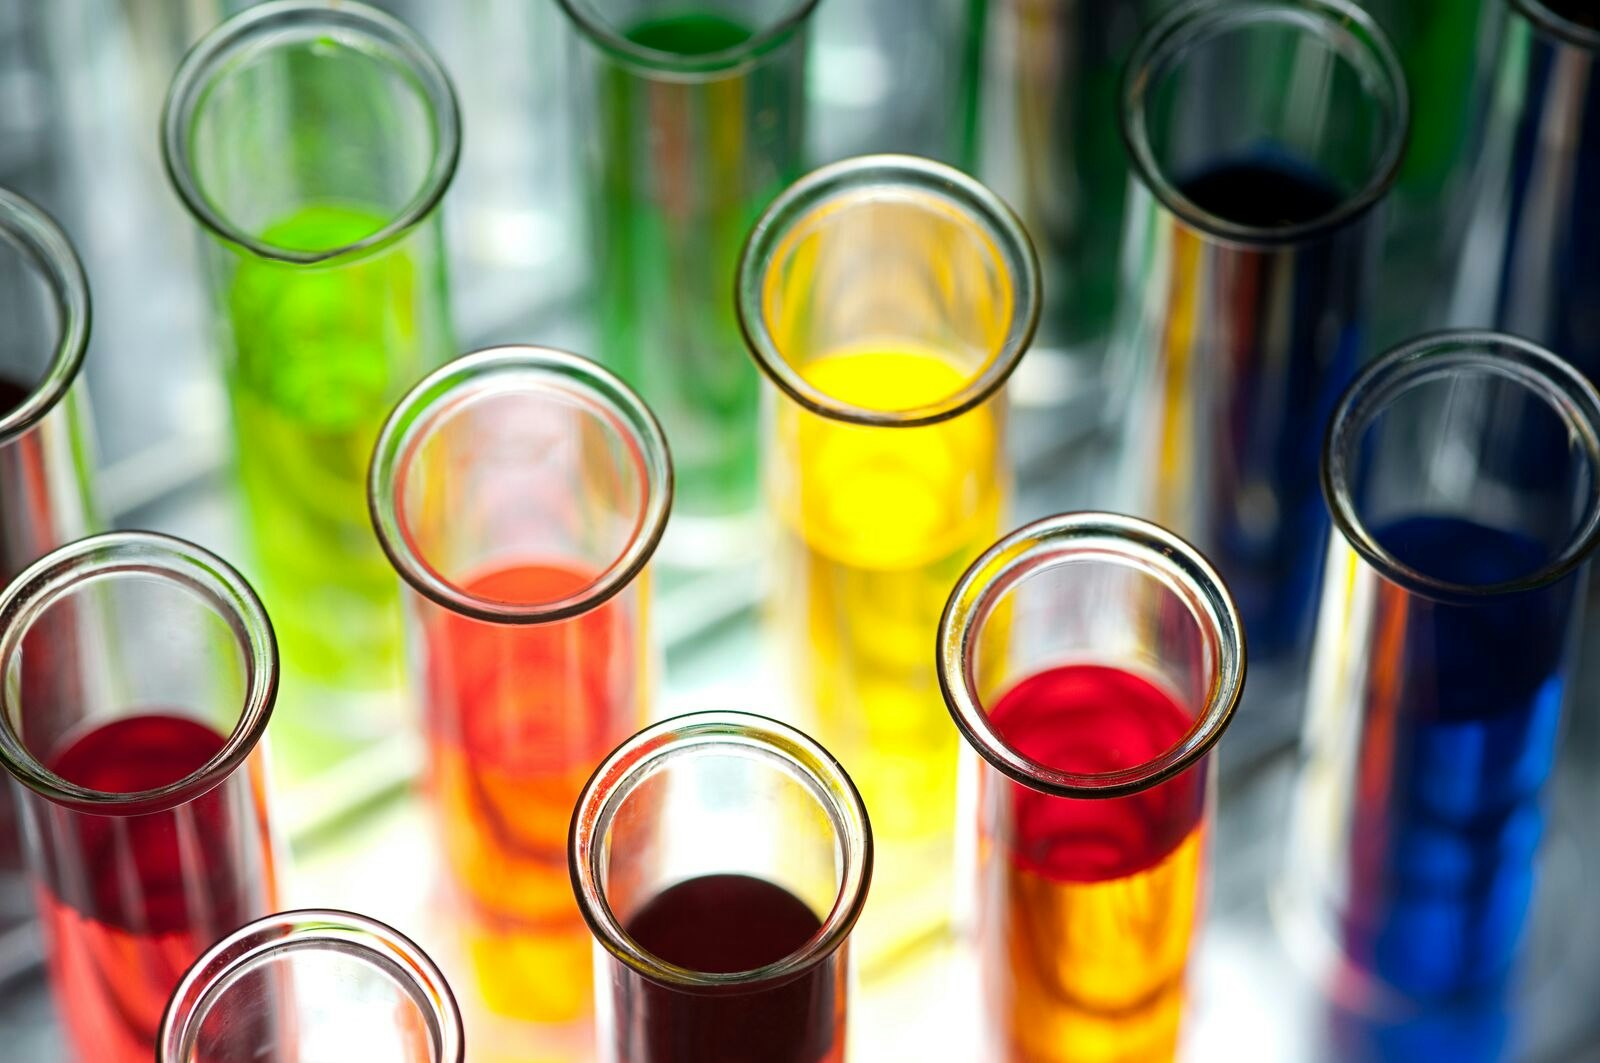 Test Tubes with Chemicals